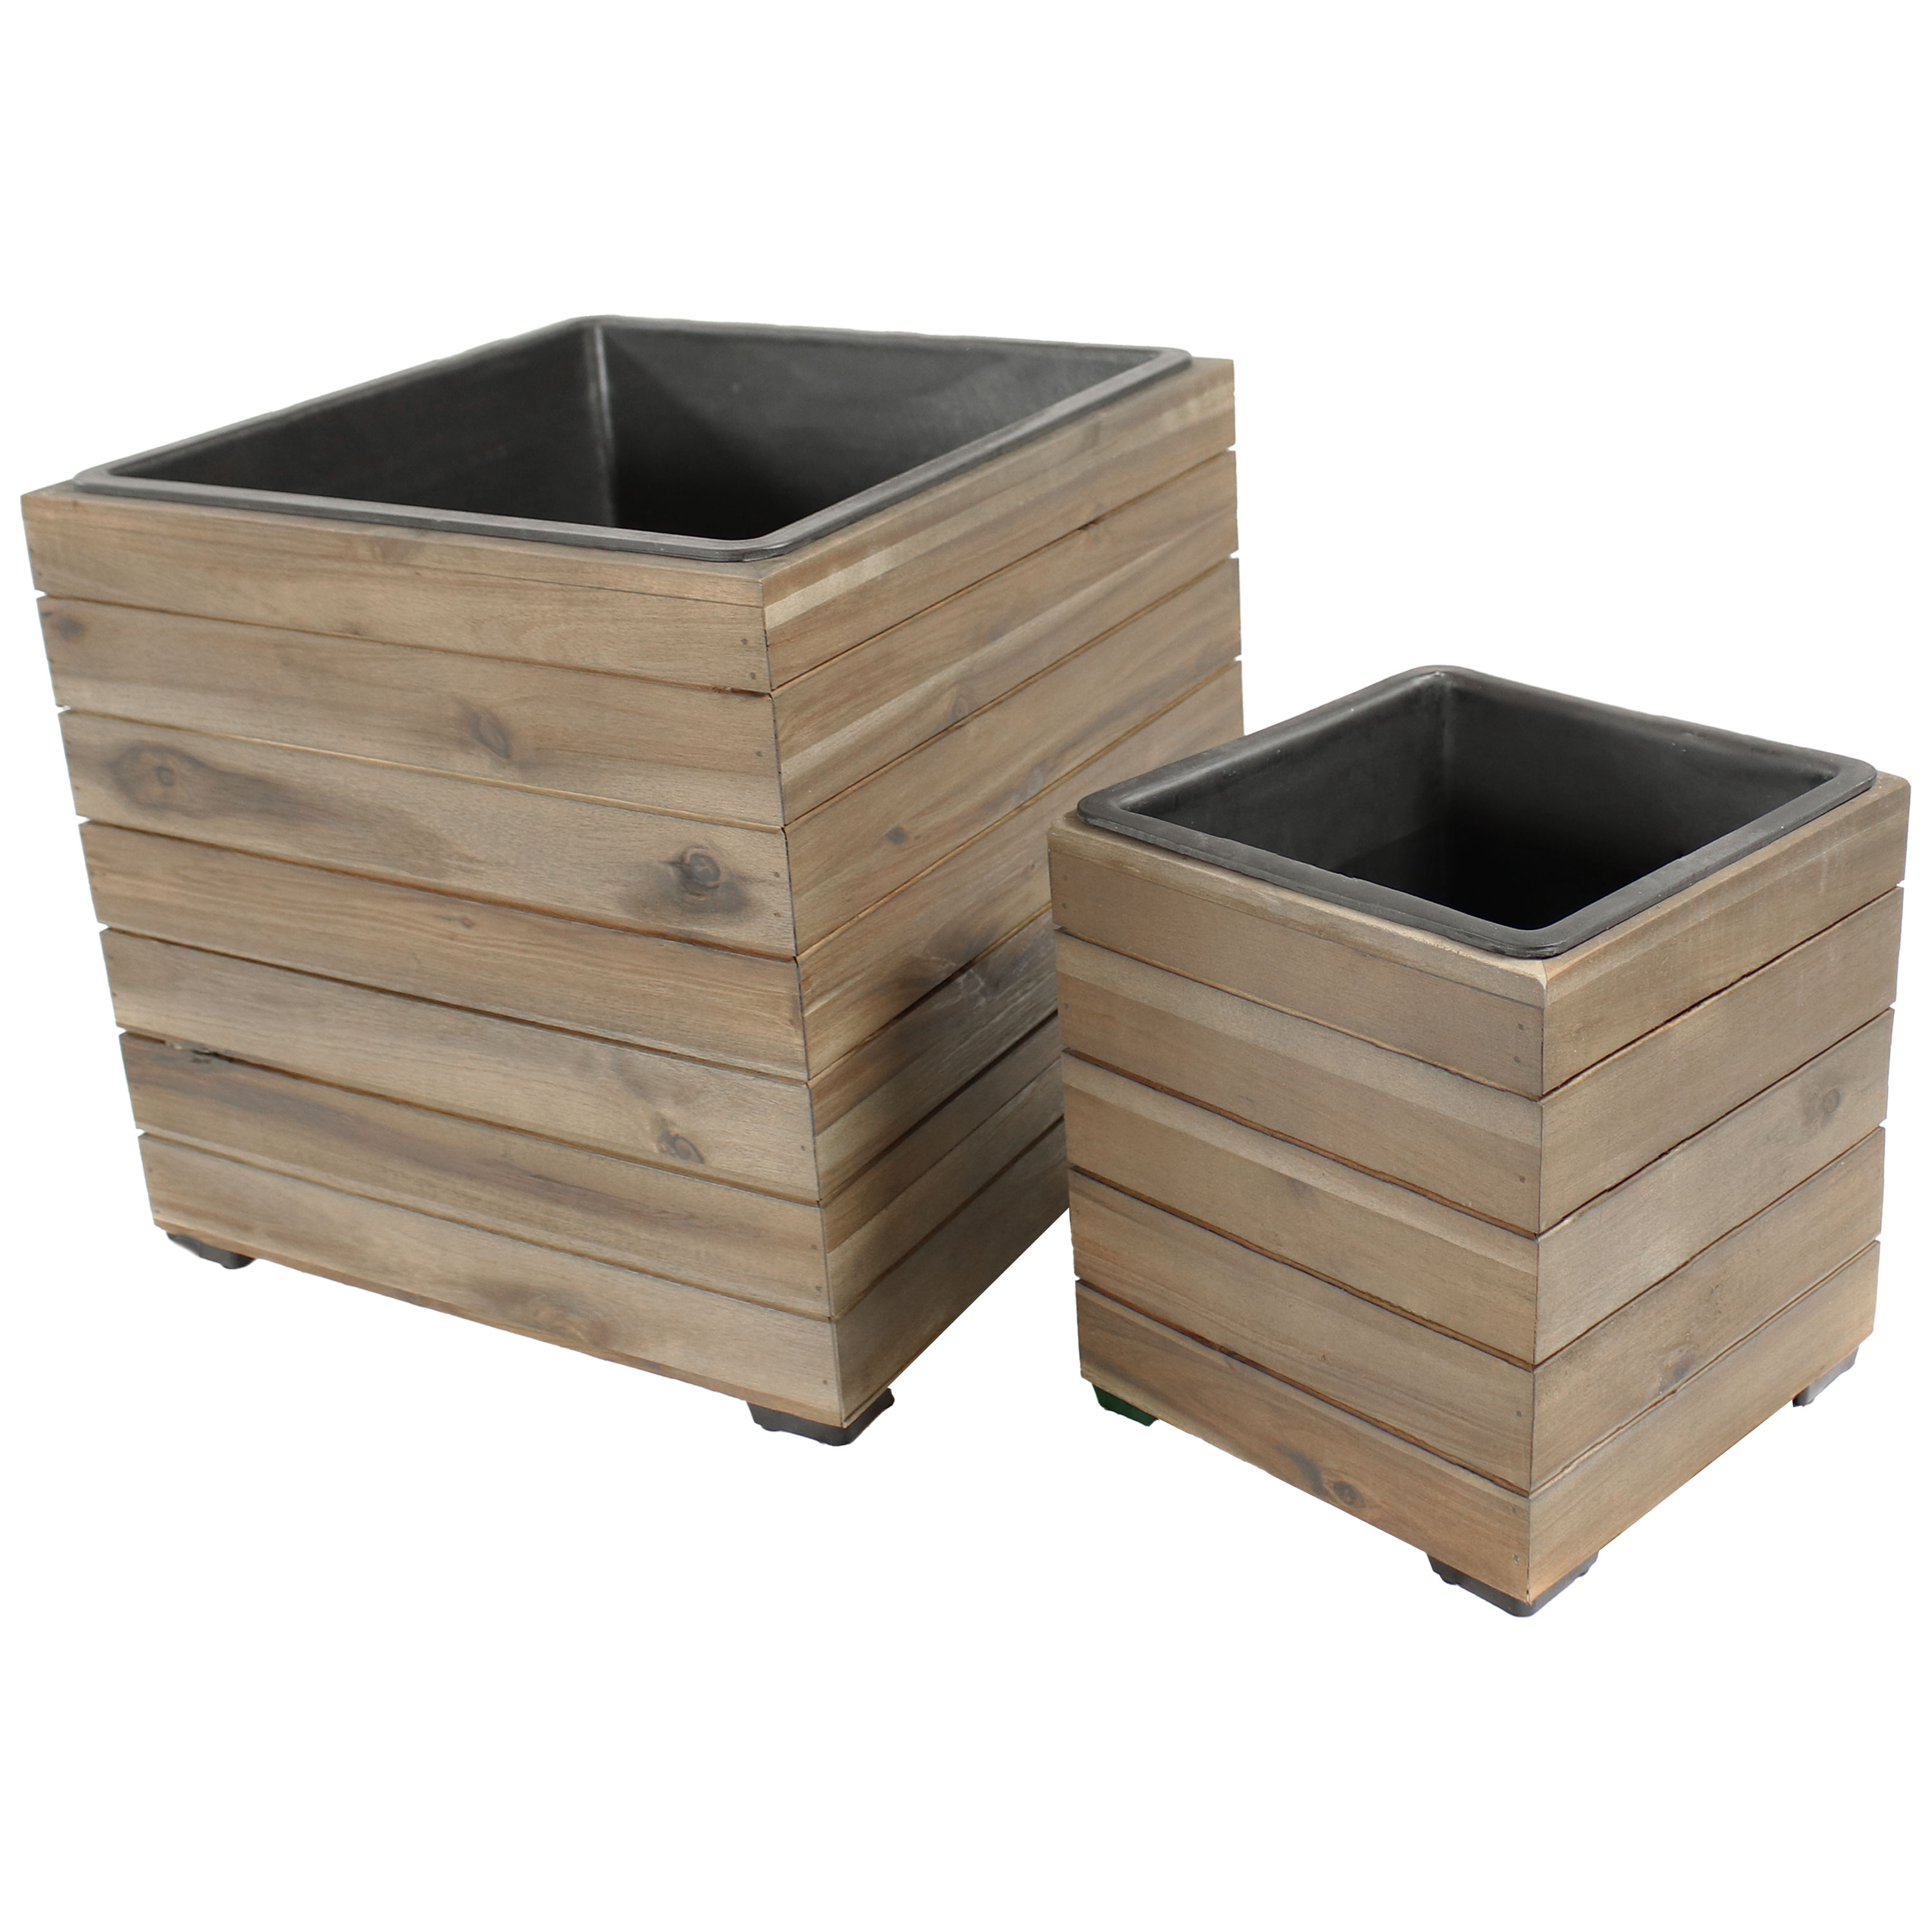 2-Piece Square Wood Planter Box with Liner - Anthracite